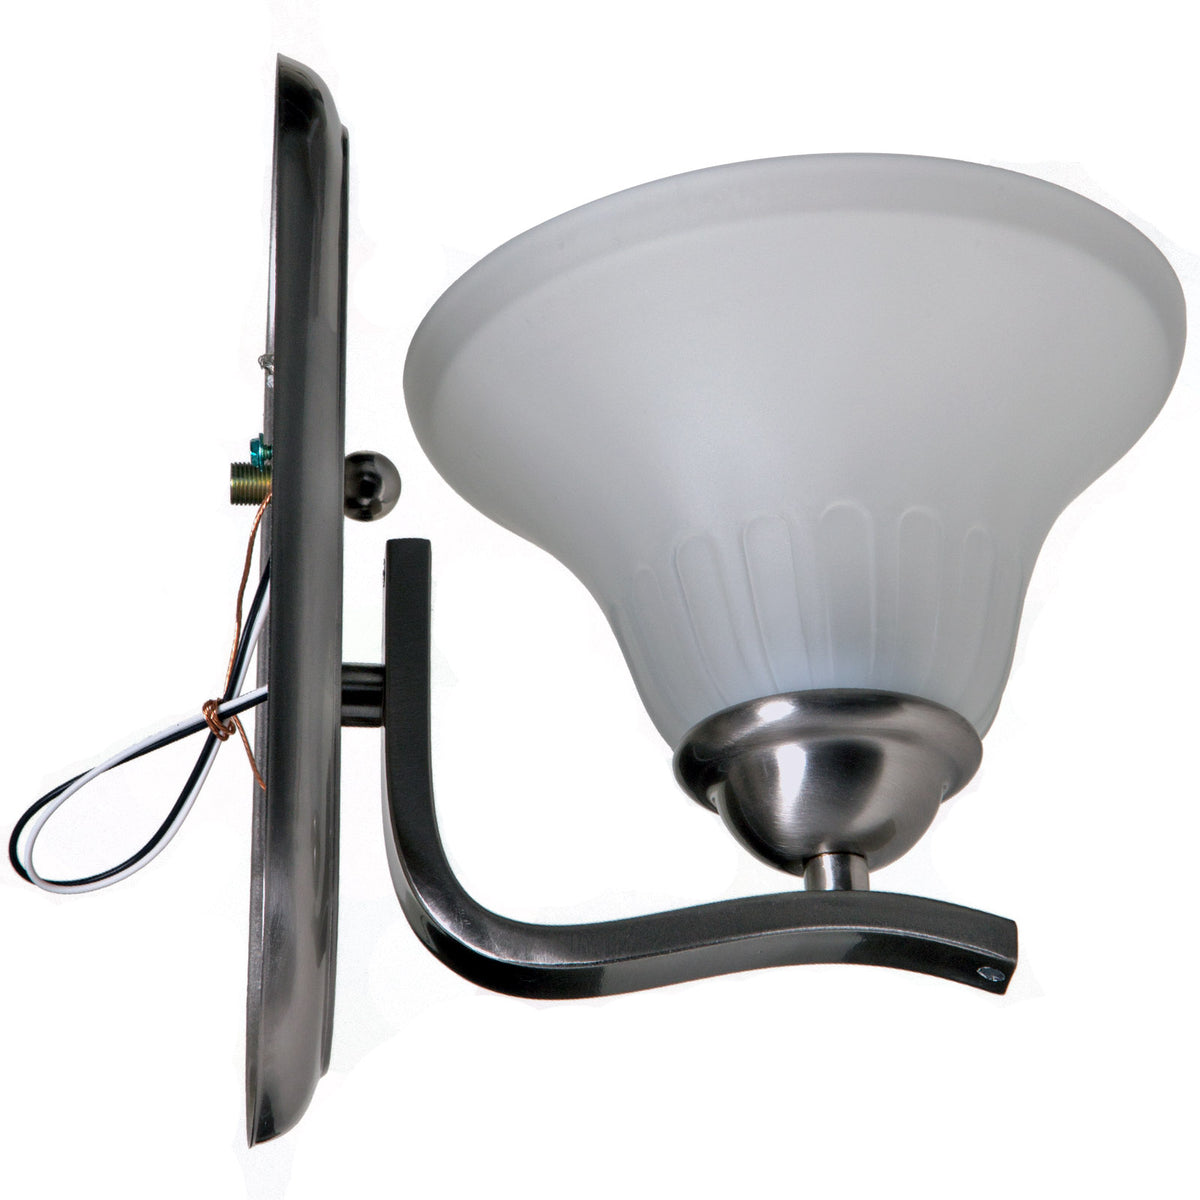 buy wall mount light fixtures at cheap rate in bulk. wholesale & retail lighting parts & fixtures store. home décor ideas, maintenance, repair replacement parts